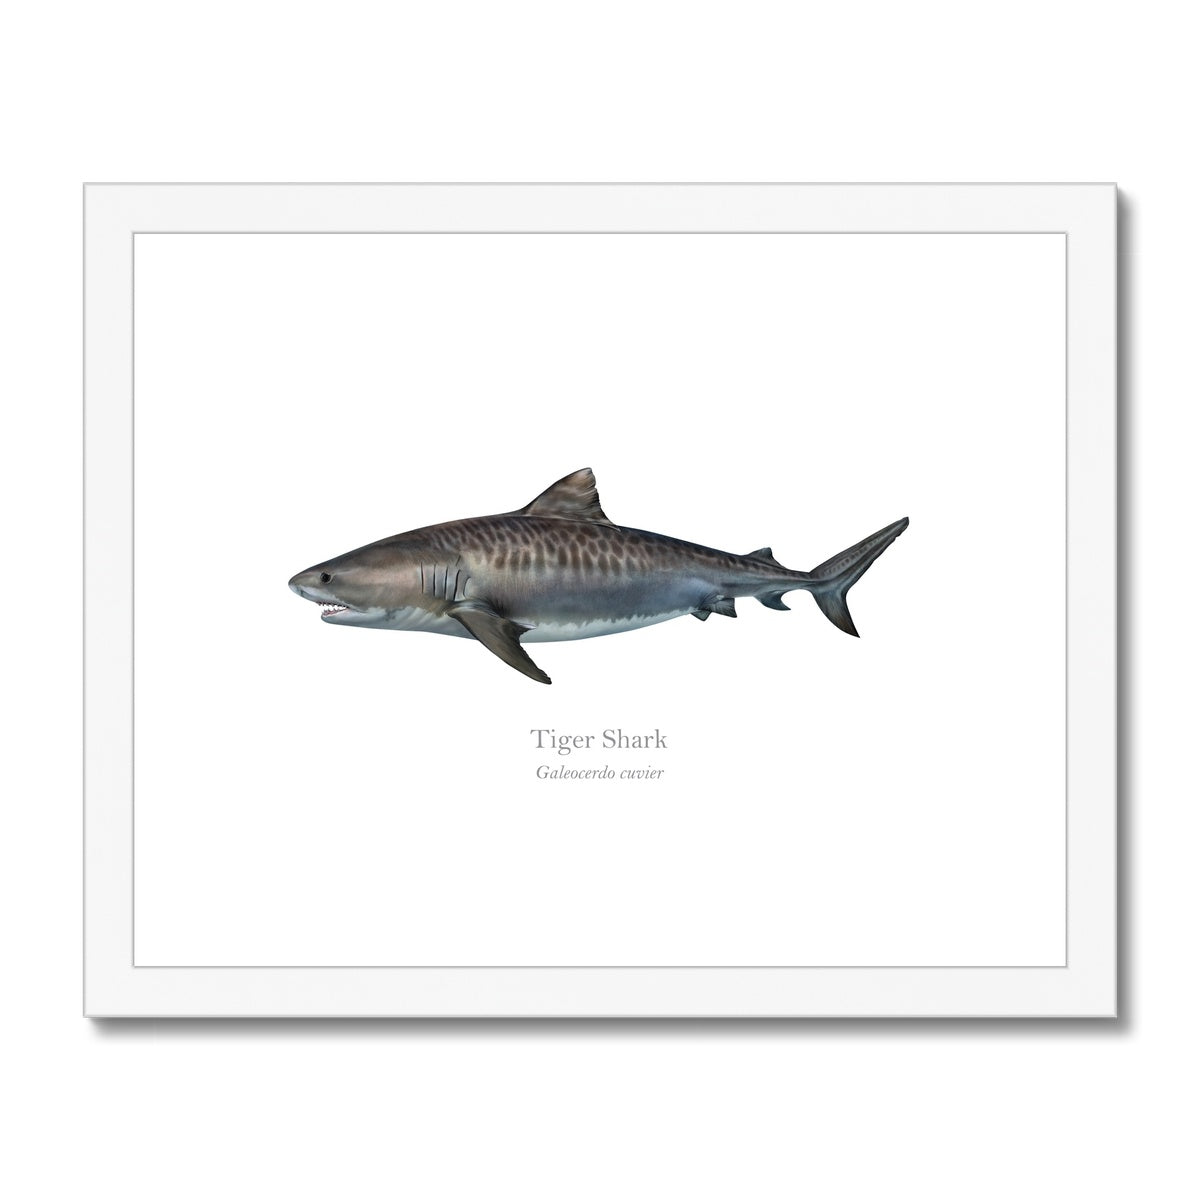 Tiger shark - Framed & Mounted Print - With Scientific Name